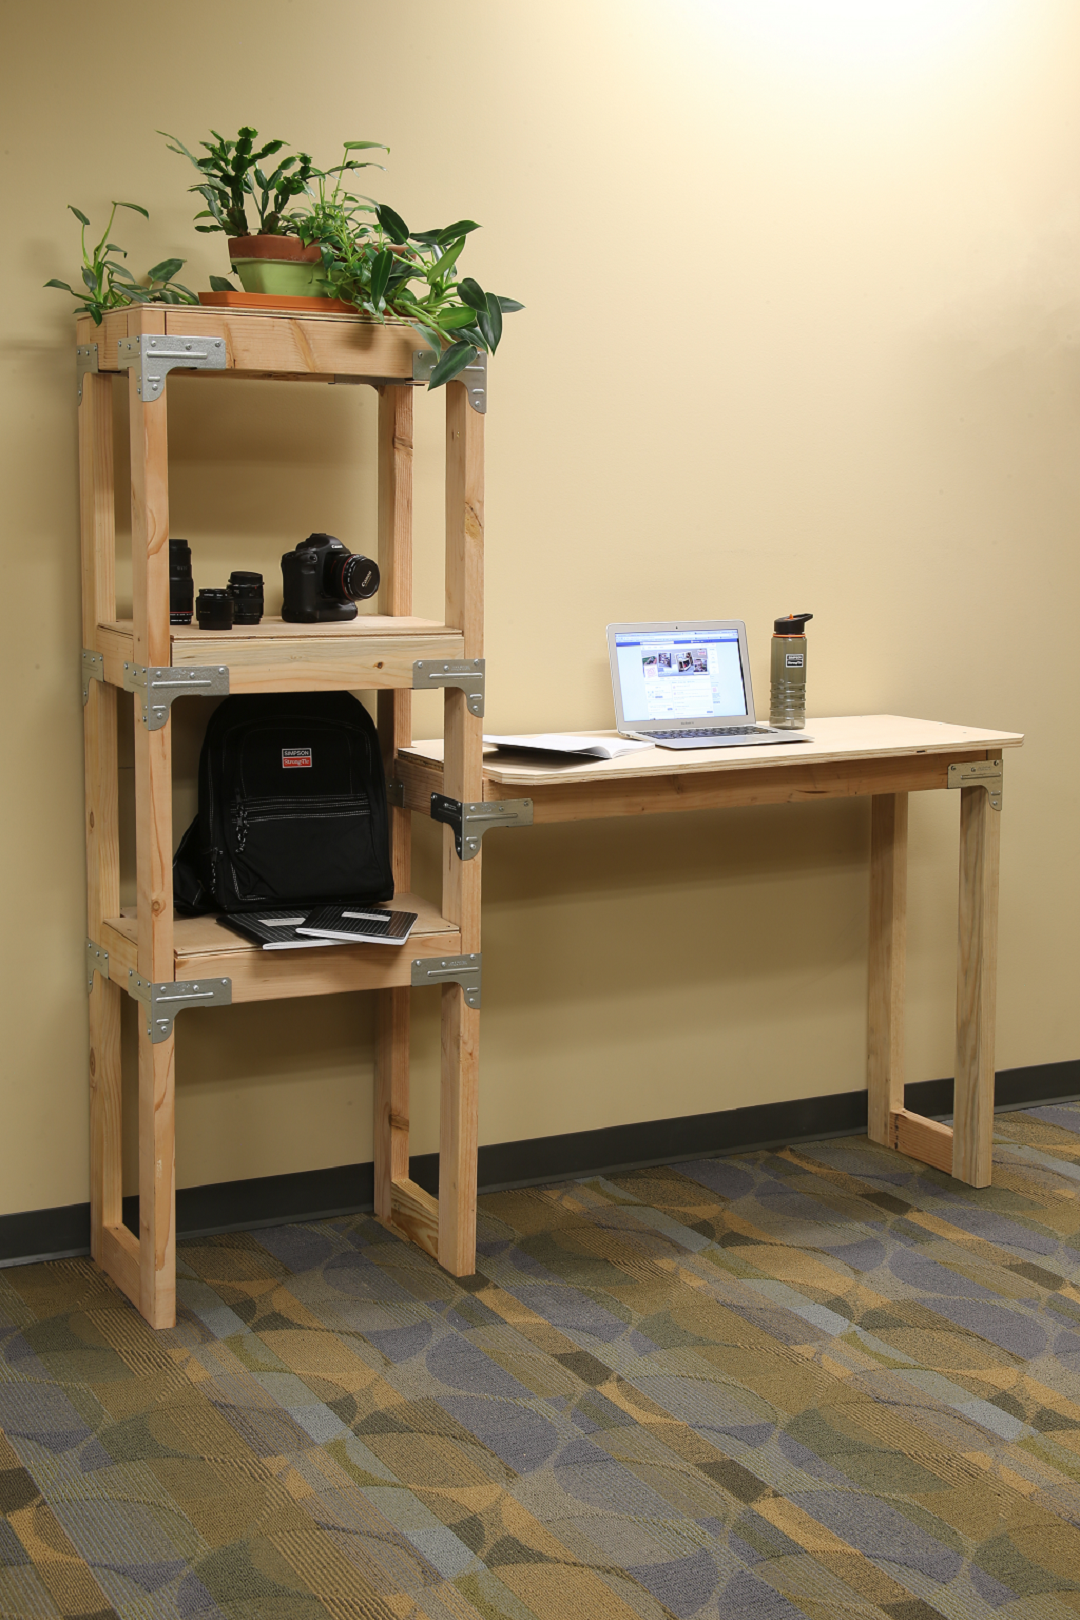 Standing Desk With Shelving Unit, Desk And Shelving Unit